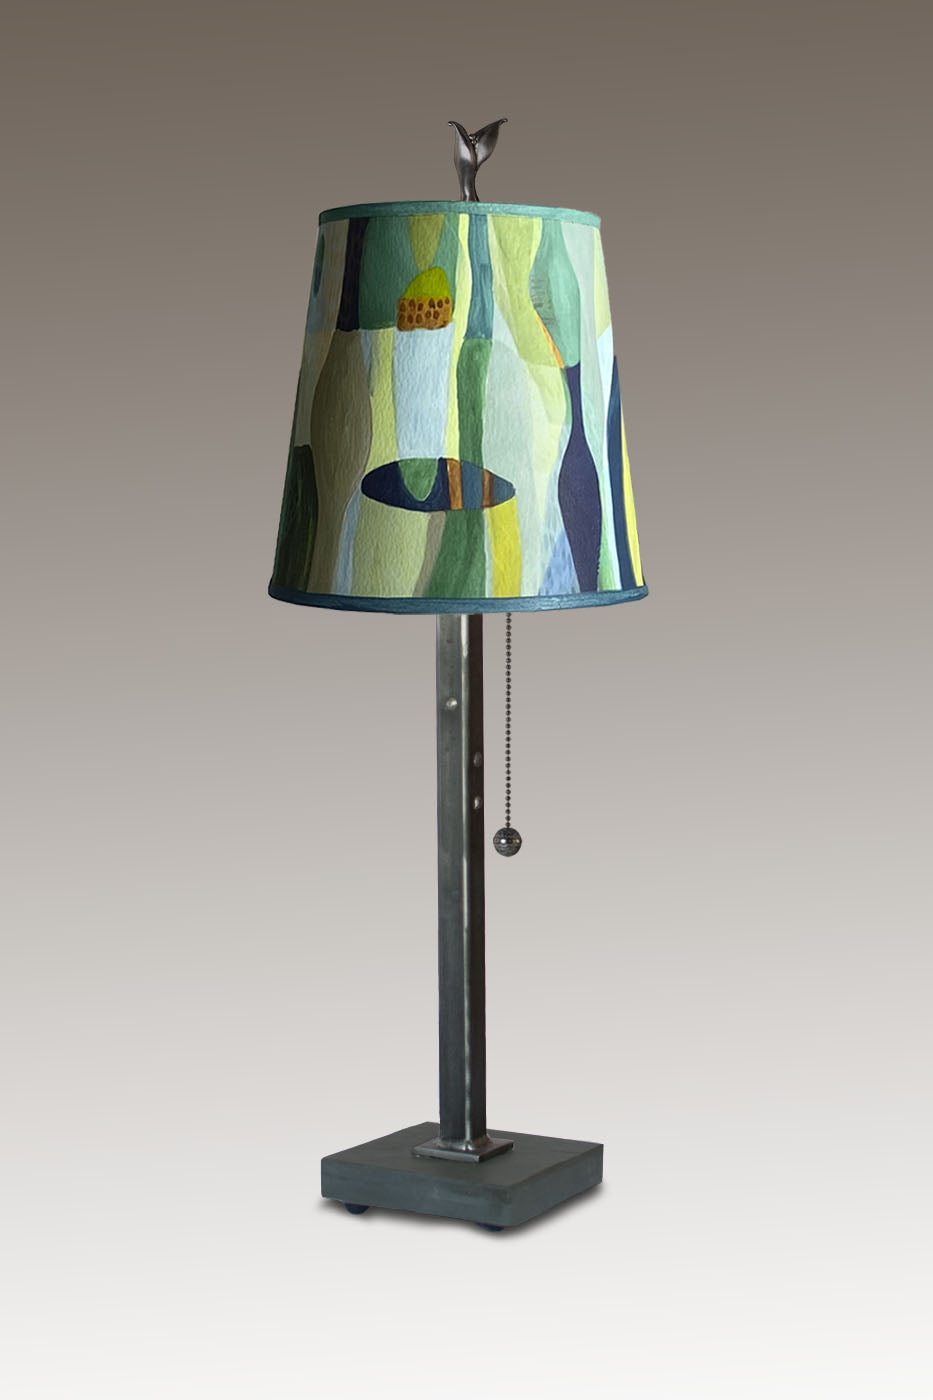 Steel Table Lamp with Small Drum Shade in Riviera in Citrus